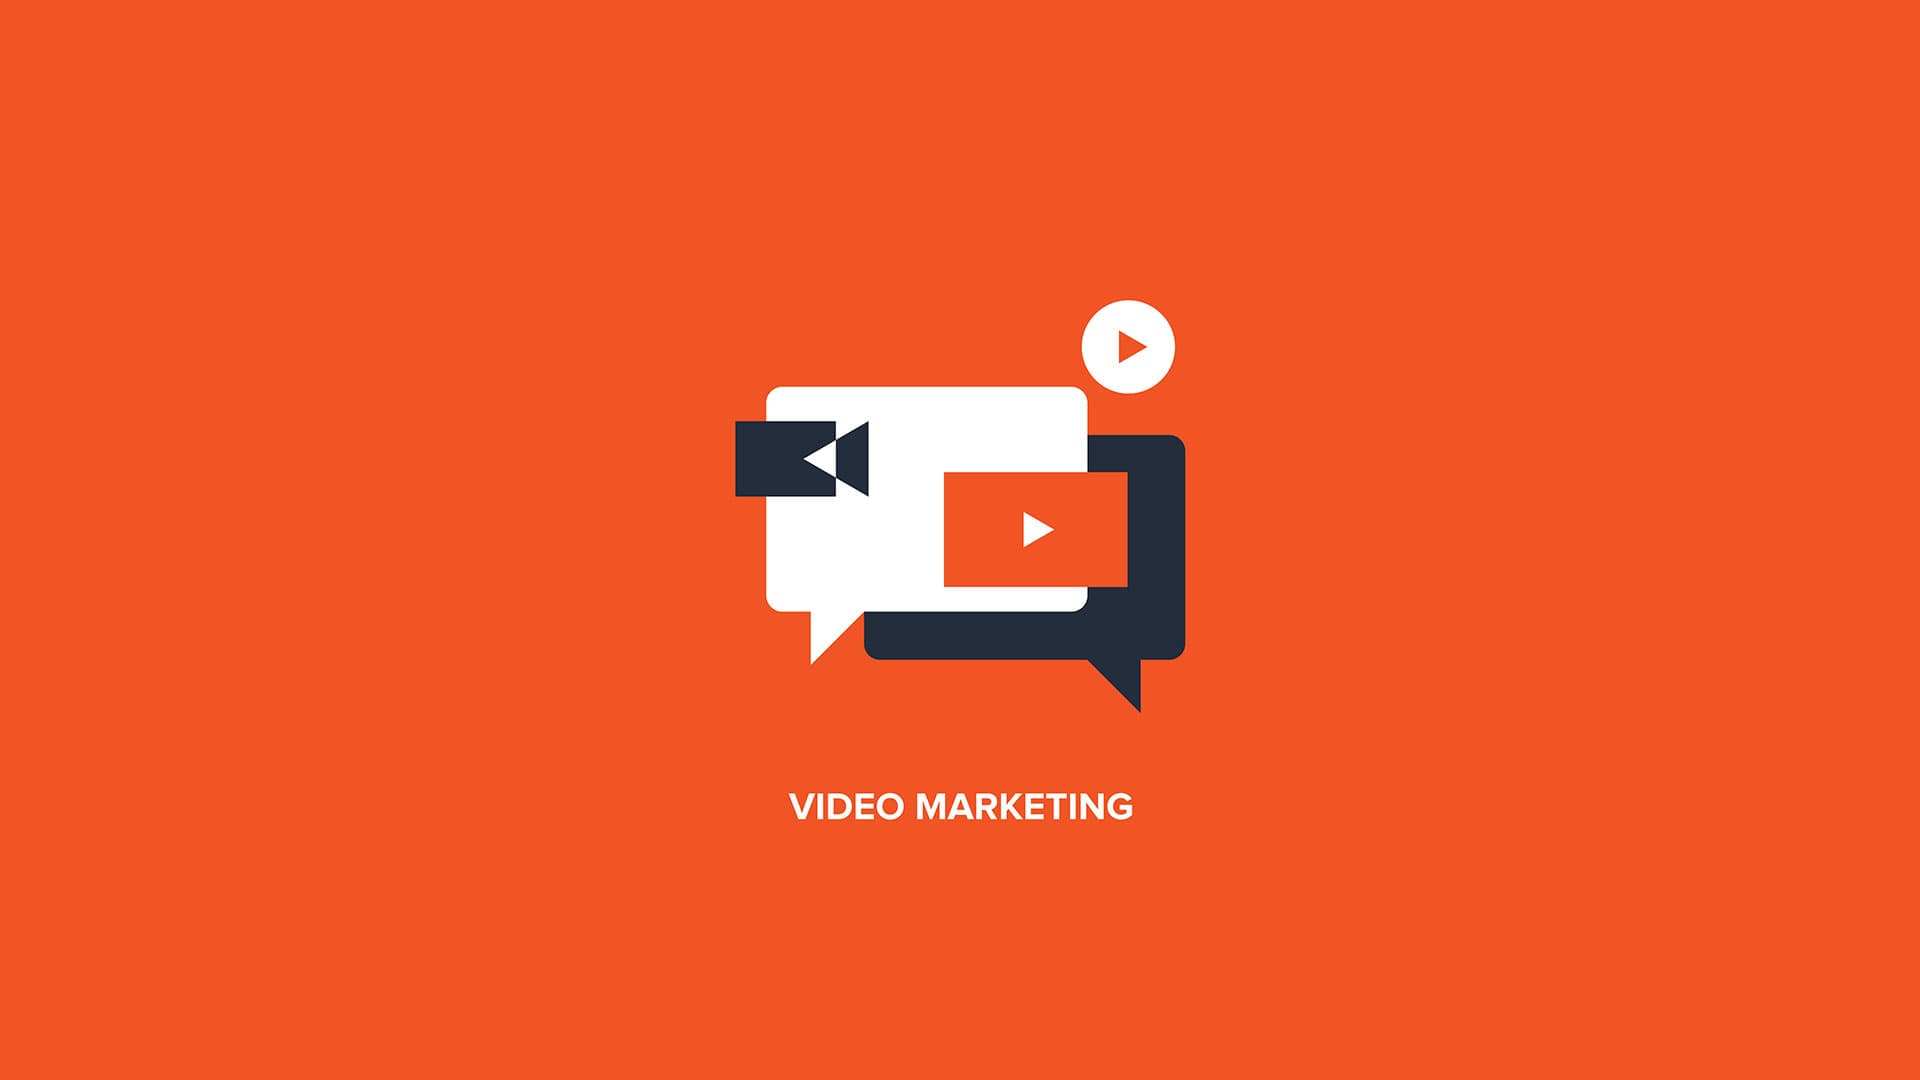 Things to Consider When Working on a DIY Video Marketing Project